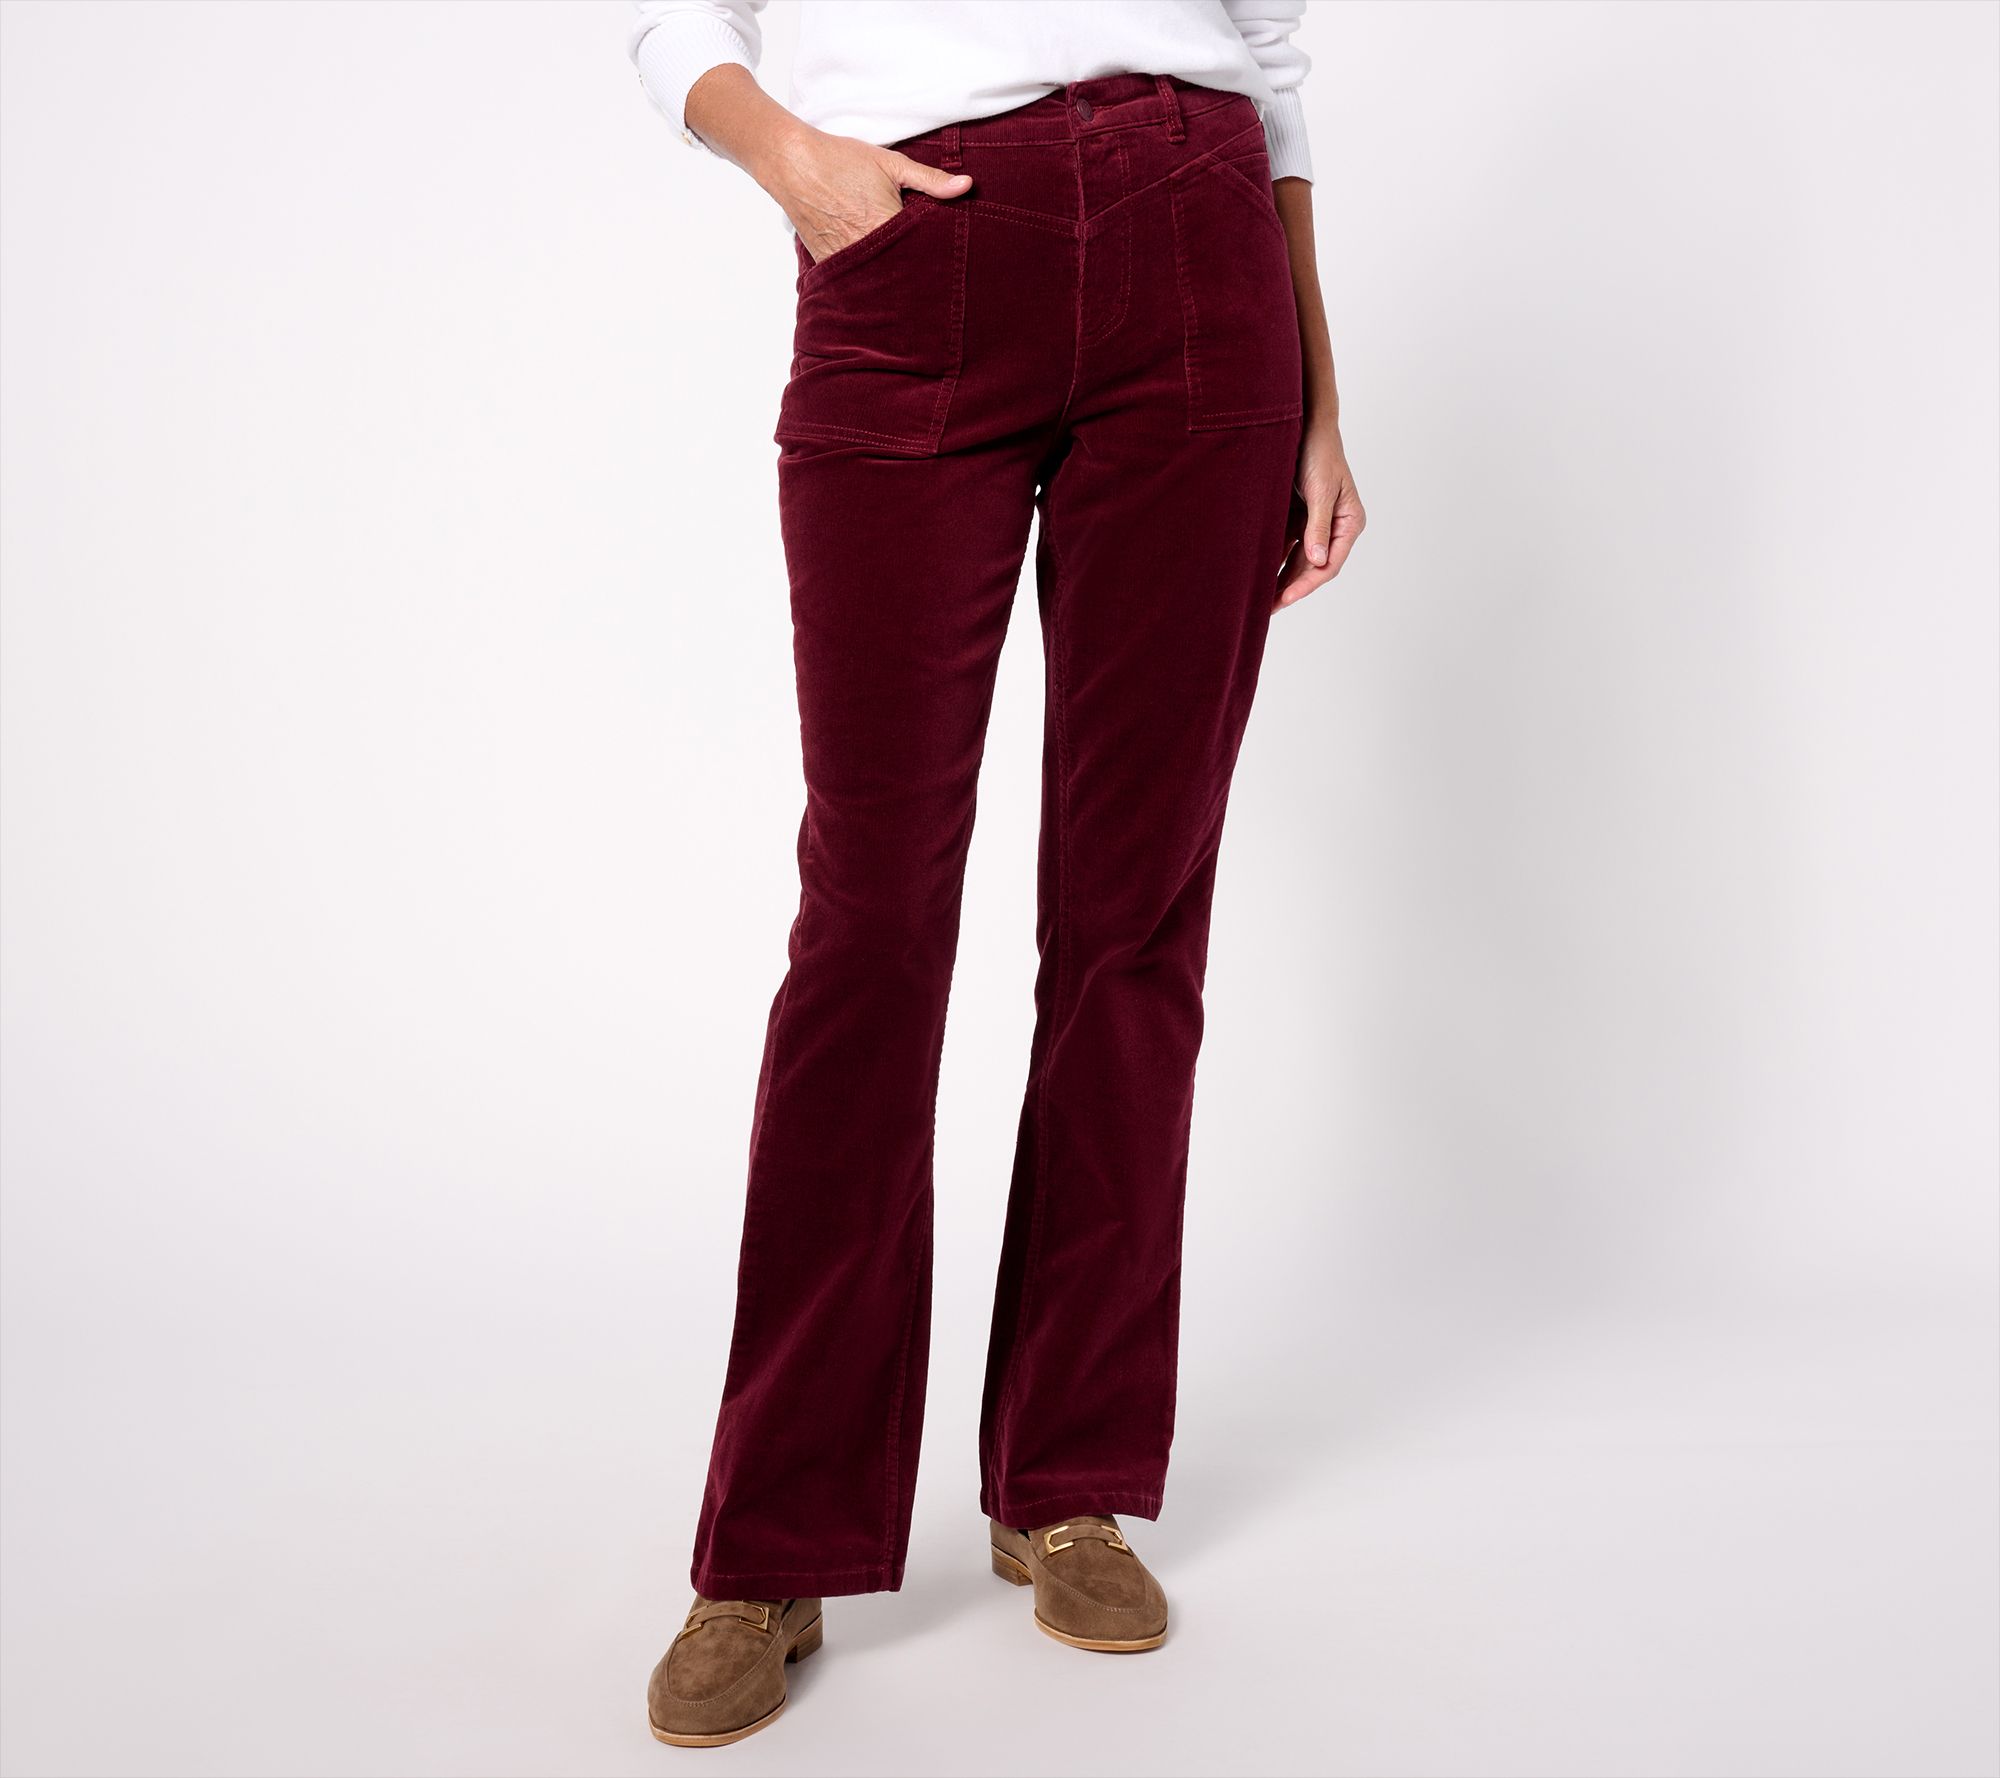 Denim & Co. Canyon Retreat Corduroy Flare Pant with Pockets 